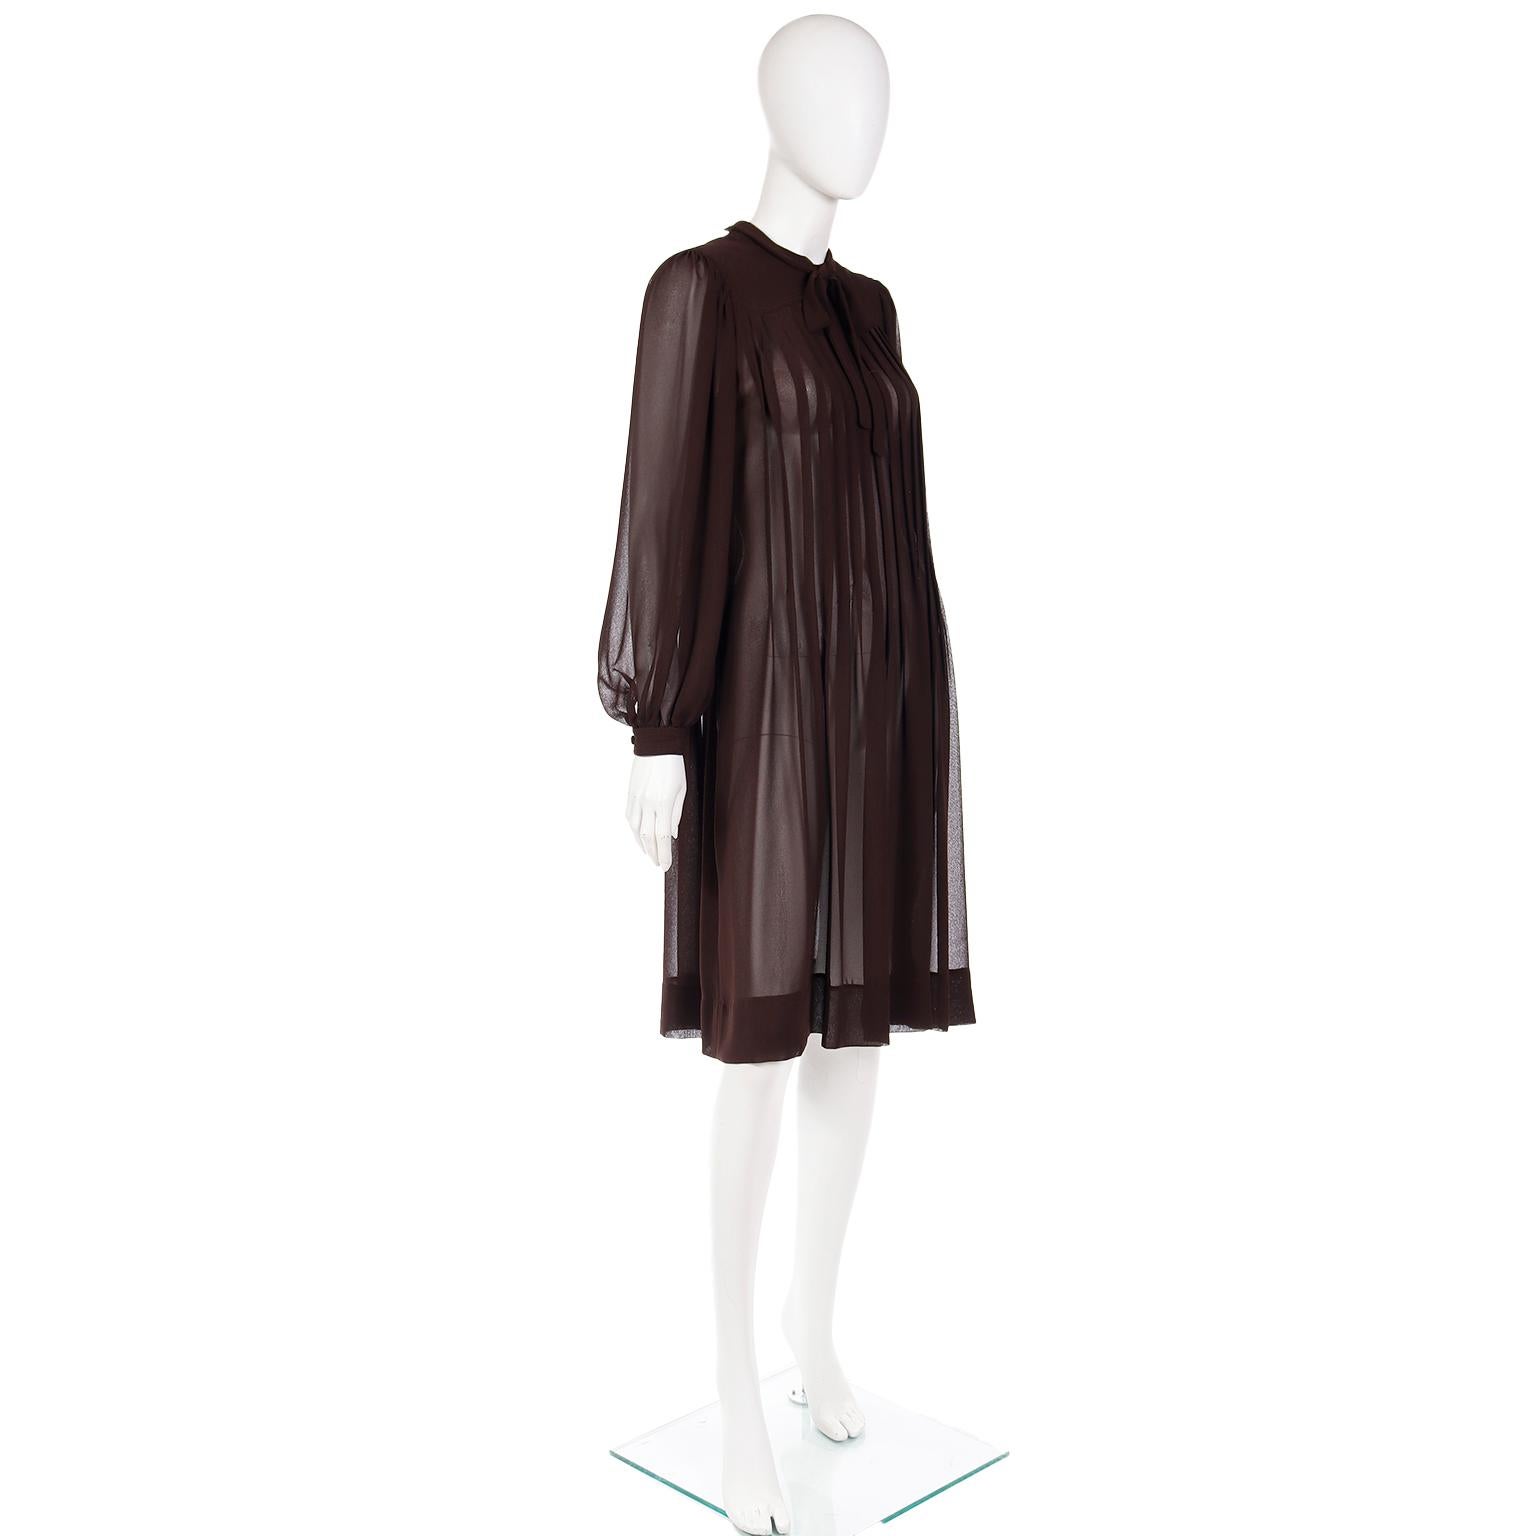 This lovely vintage Albert Nipon brown pleated crepe dress is from the late 1970's. The dress is semi sheer and it can be worn over a slip or shapewear. The dress closes with fabric covered buttons and it has a tie at neck that can be knotted or